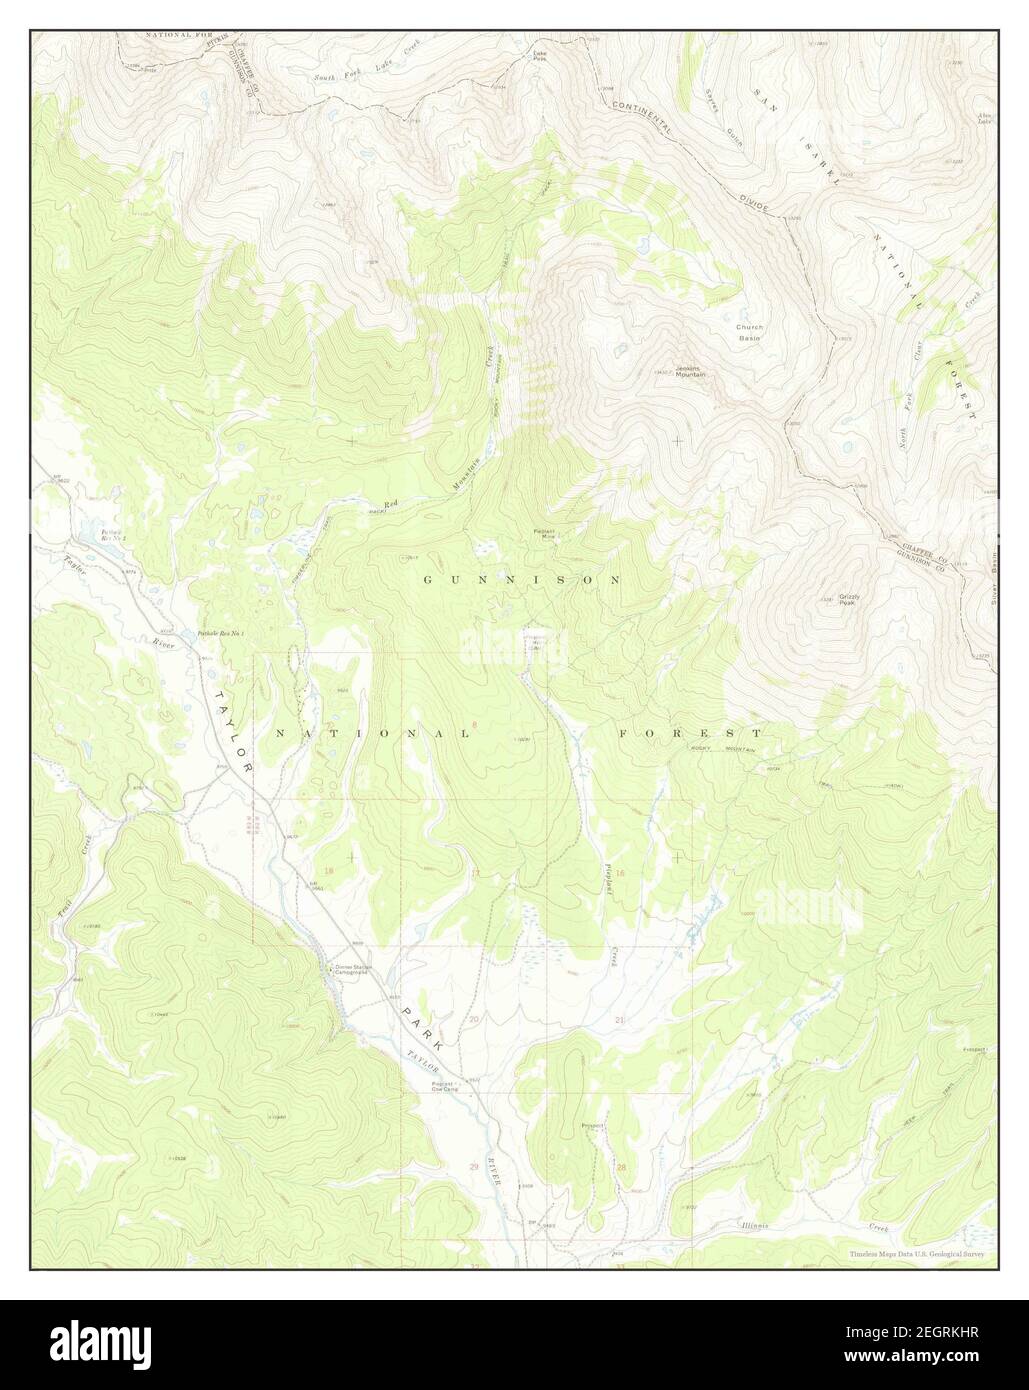 Pieplant, Colorado, map 1967, 1:24000, United States of America by Timeless Maps, data U.S. Geological Survey Stock Photo